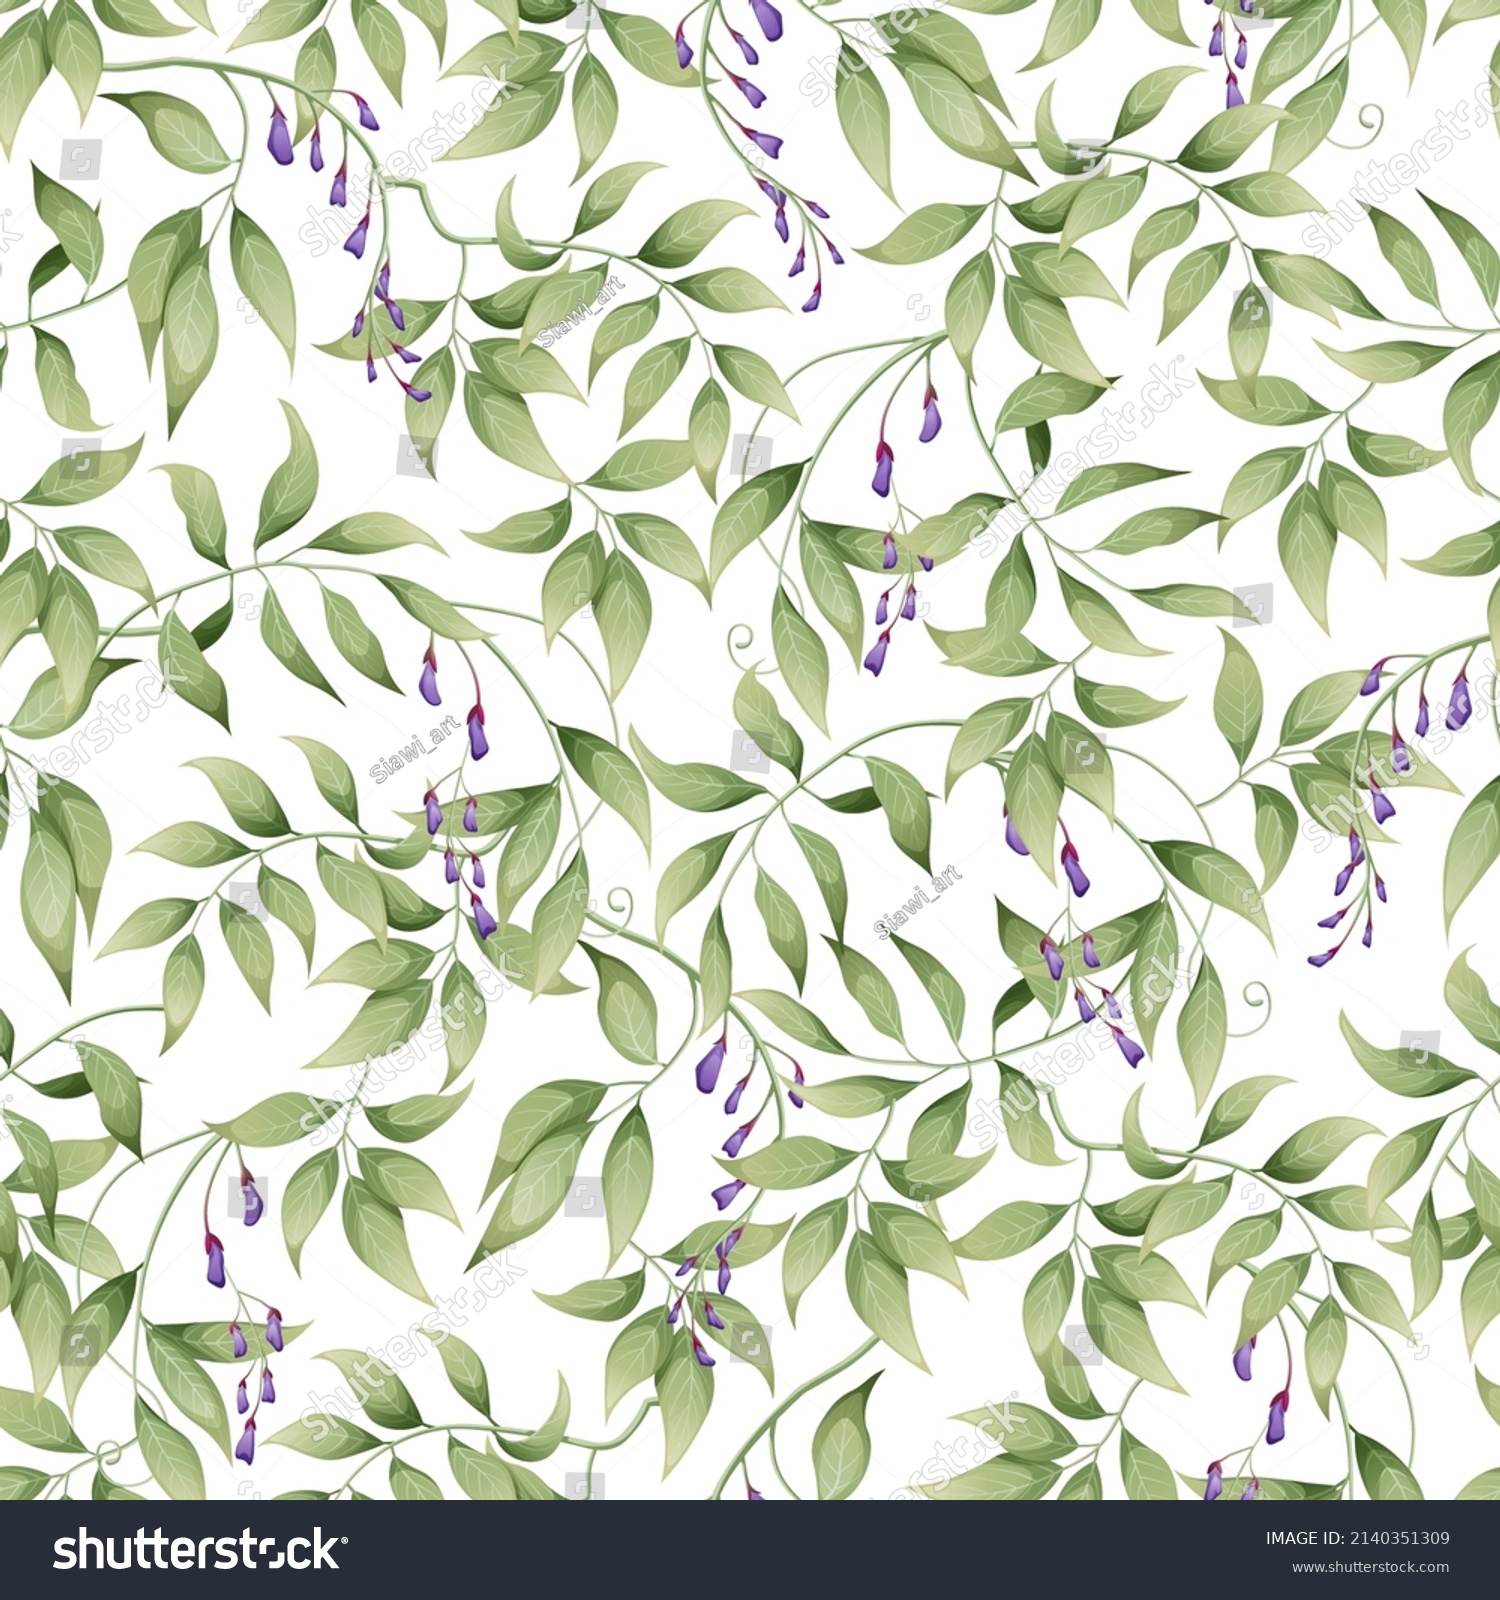 SVG of Seamless pattern with green leaves and small purple wisteria flowers on a white background. Great for textile, fabric, wrapping paper, wallpaper. svg